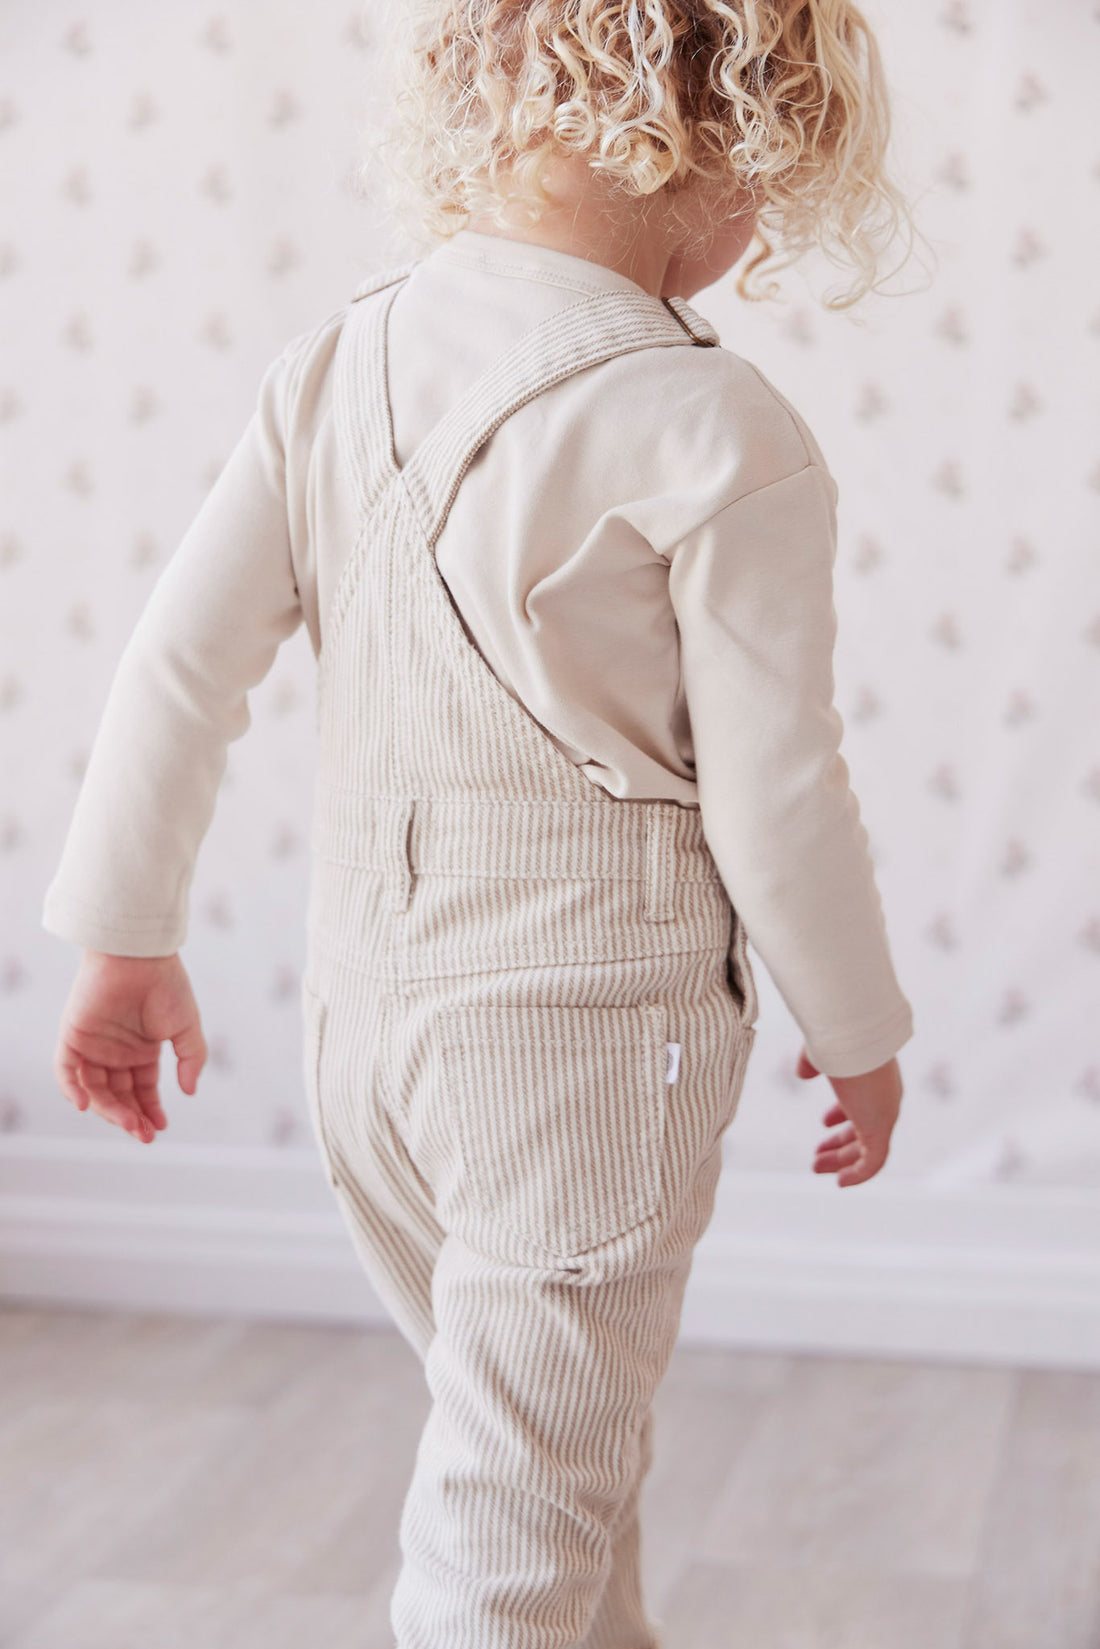 Jordie Cotton Twill Overall - Balm/Cloud Stripe Childrens Overall from Jamie Kay NZ